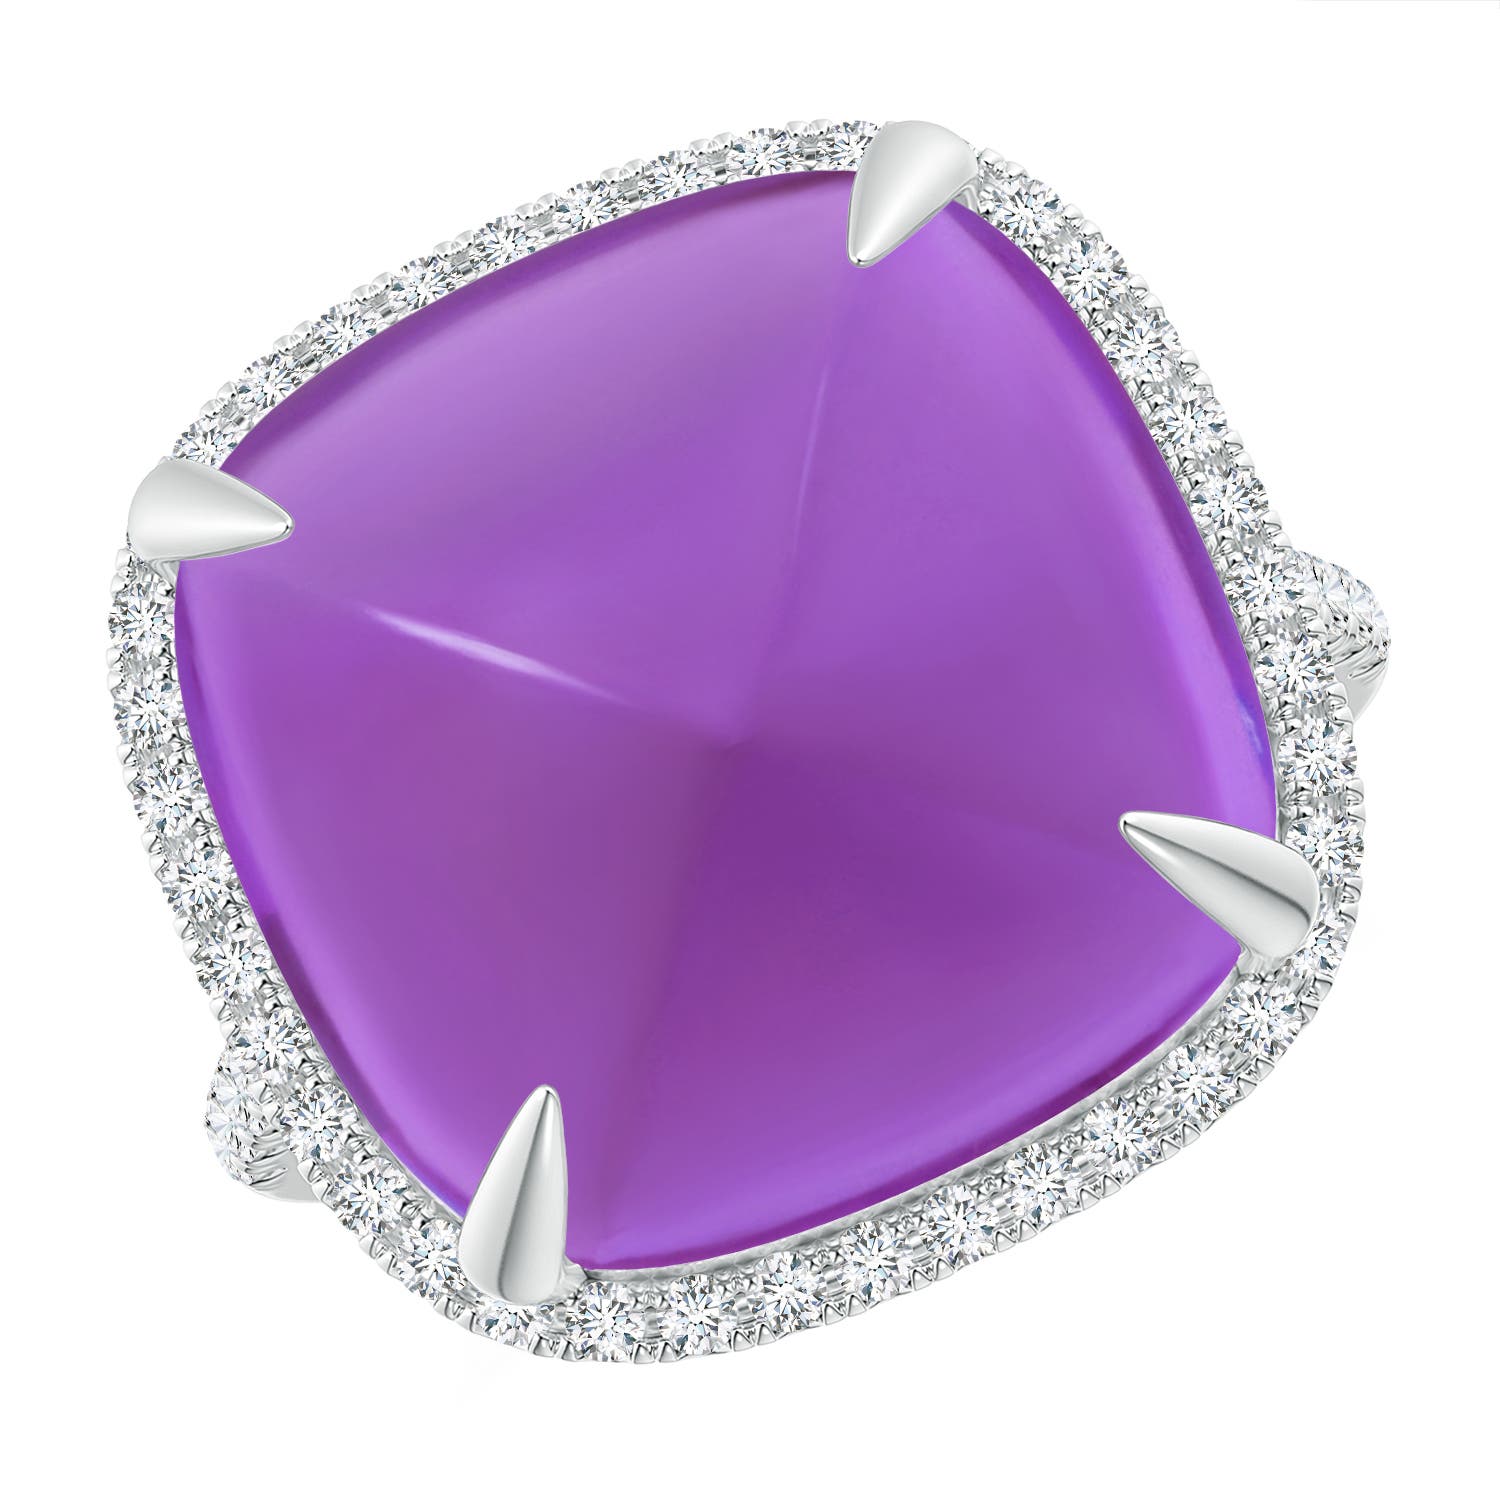 AAA - Amethyst / 16.02 CT / 14 KT White Gold